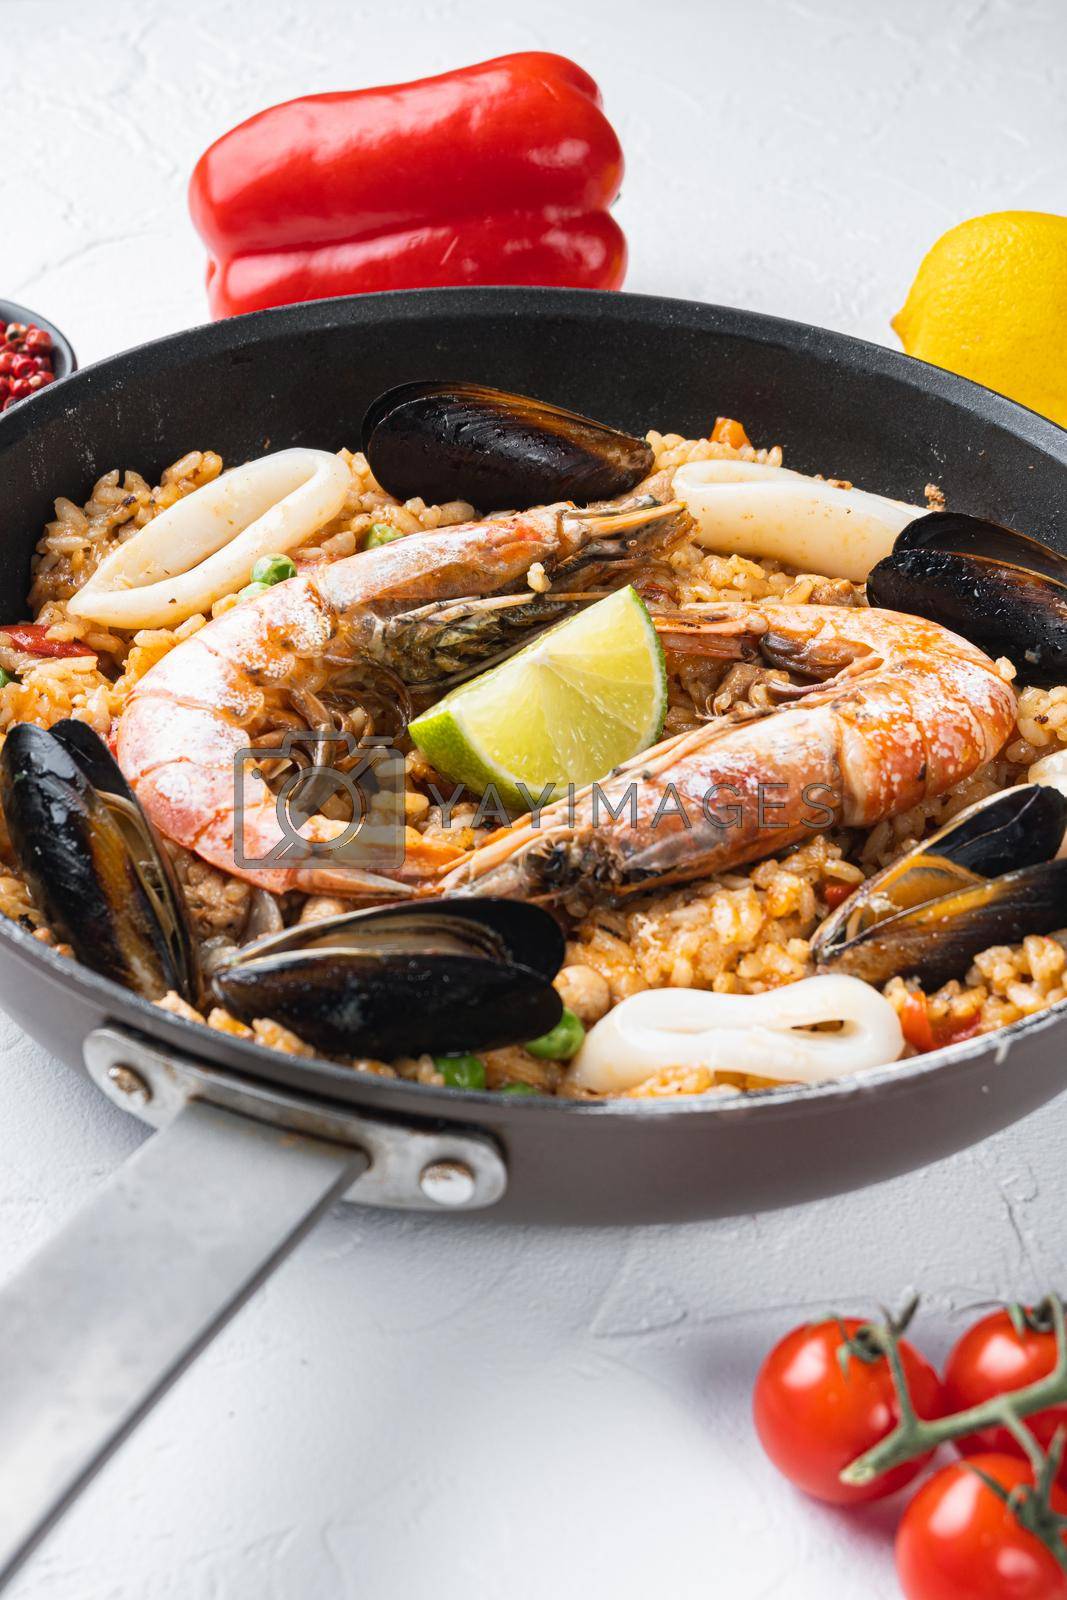 Royalty free image of Paella with seafood and chicken on white background by Ilianesolenyi